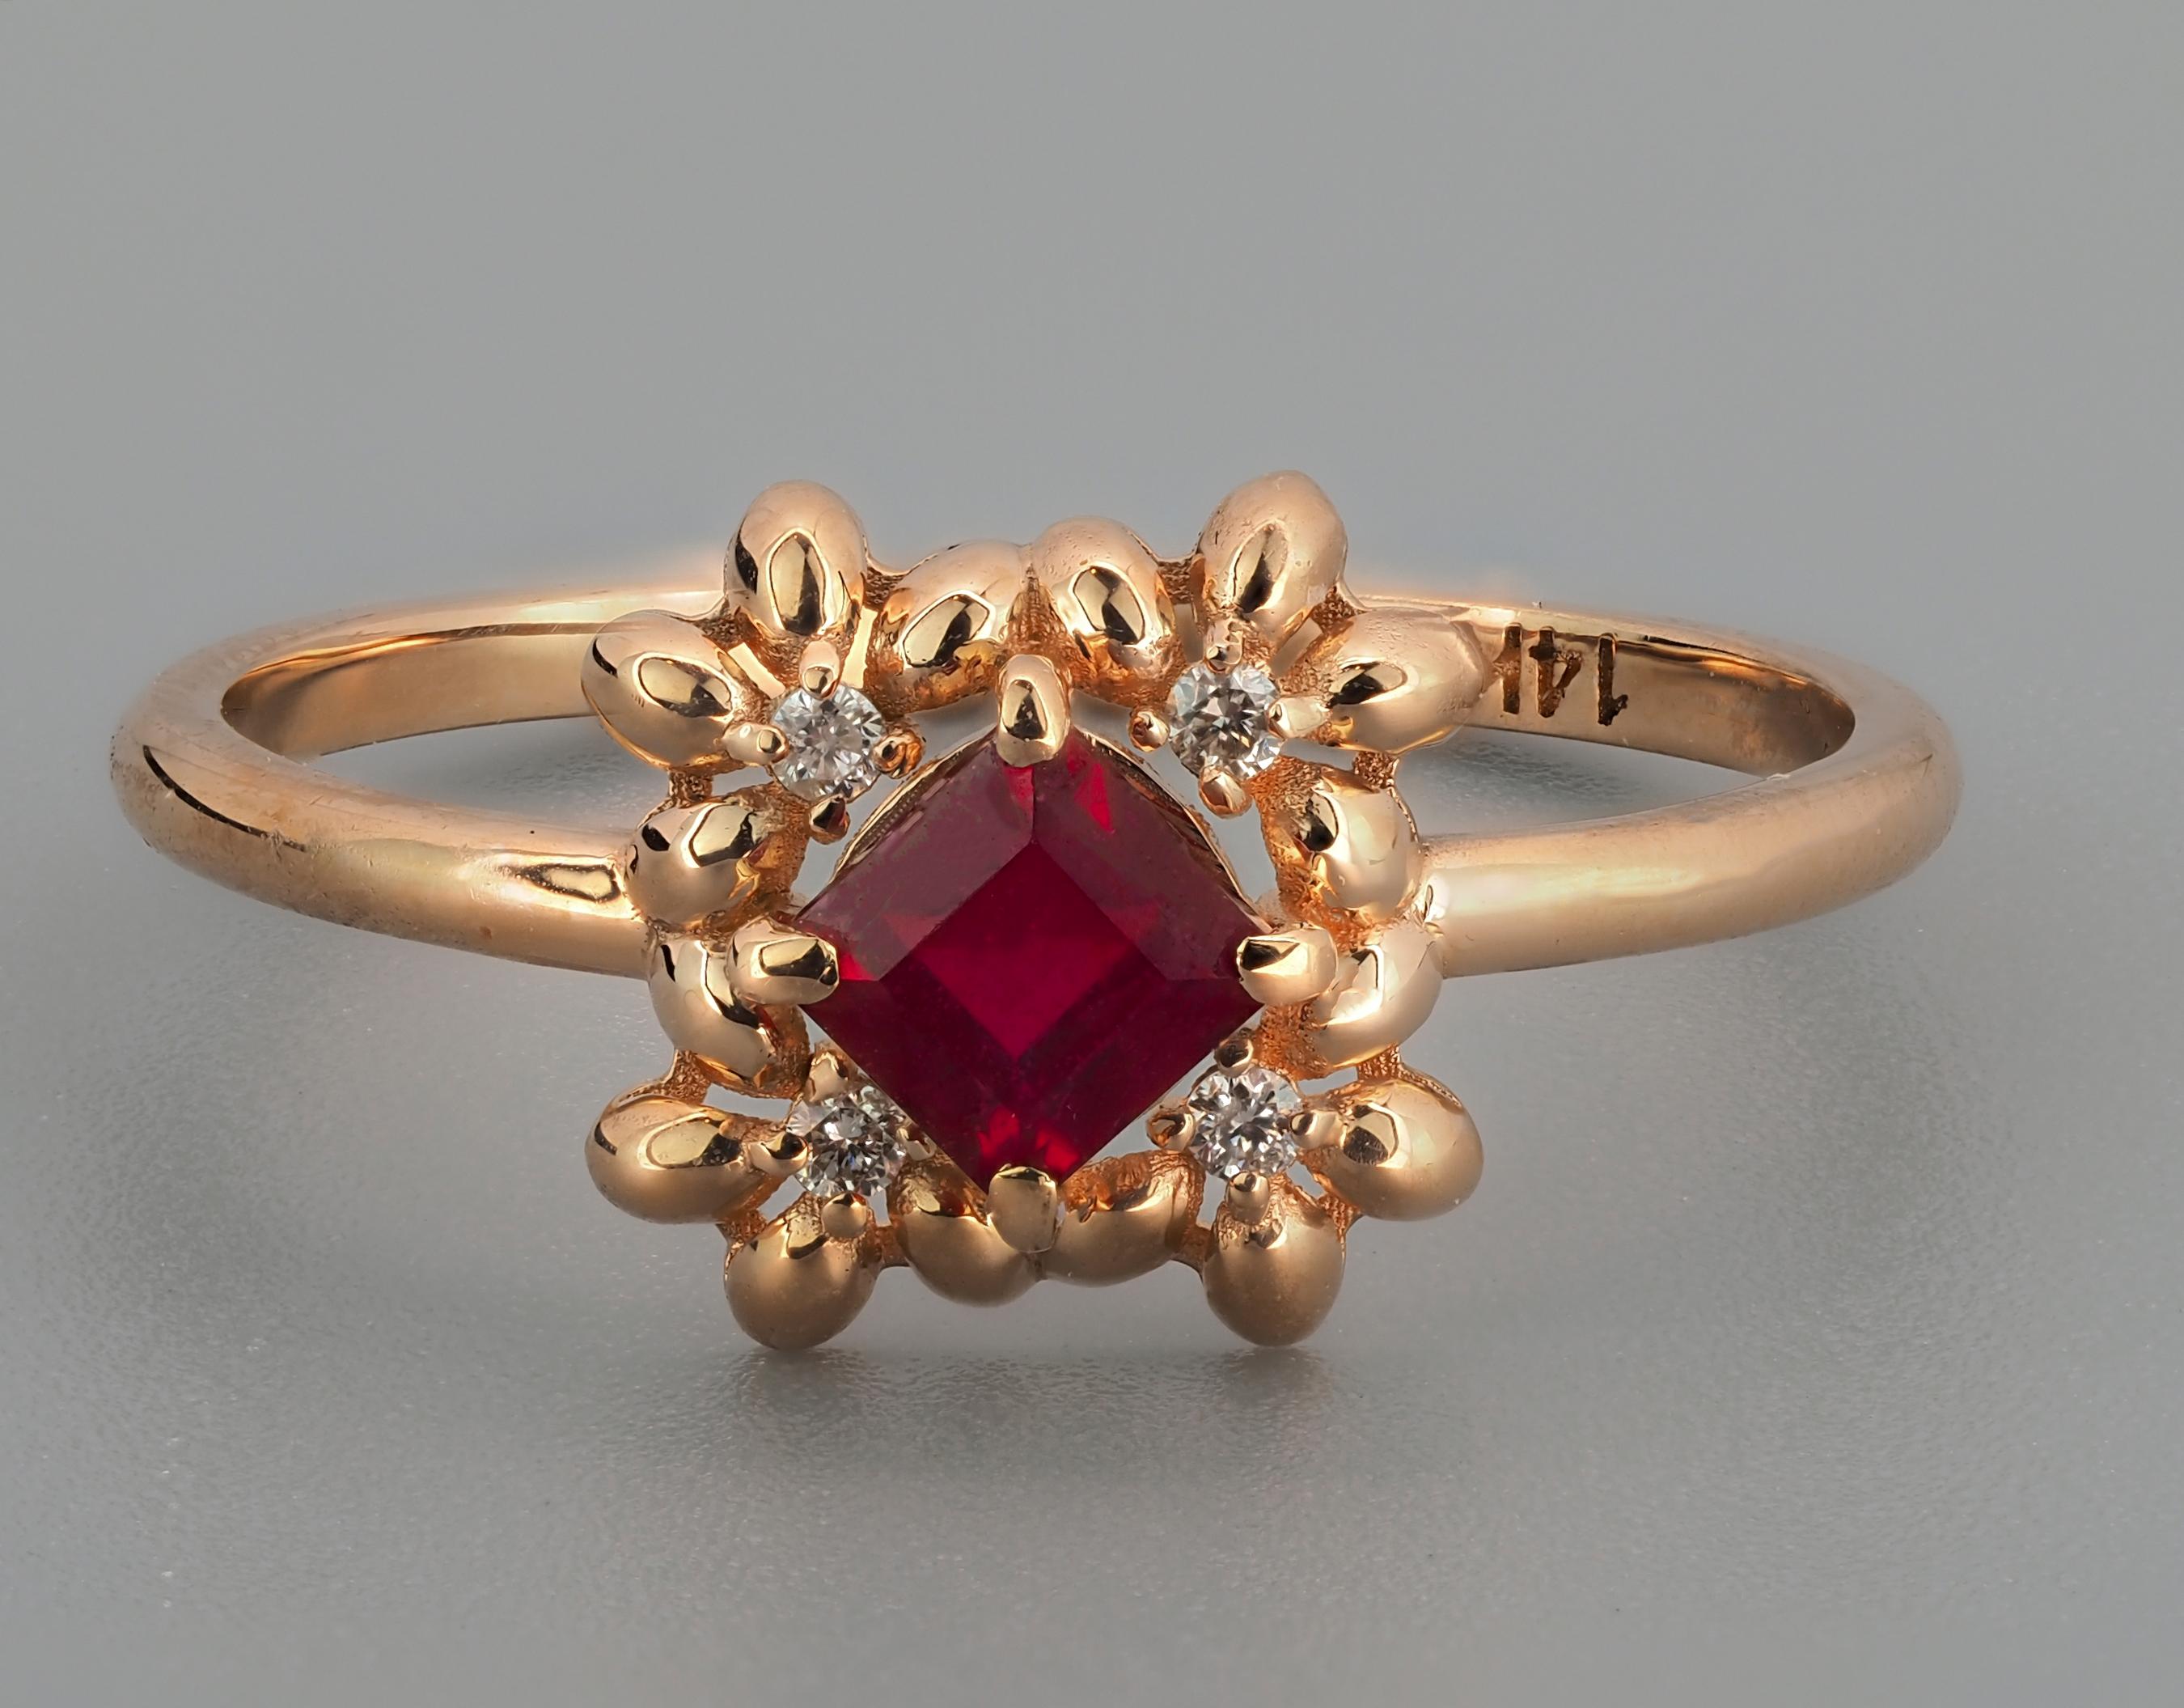 Princess Ruby Ring in 14k Gold. 
Dainty ruby Ring. Princess Ruby, Diamonds. Minimalistic ruby Ring. July birthstone ring.

Metal type: Gold
Metal stamp: 14k Gold
Weight: 1.6 gr. depends from size.

Gemstones:
Set with ruby, color - red
Princess cut,